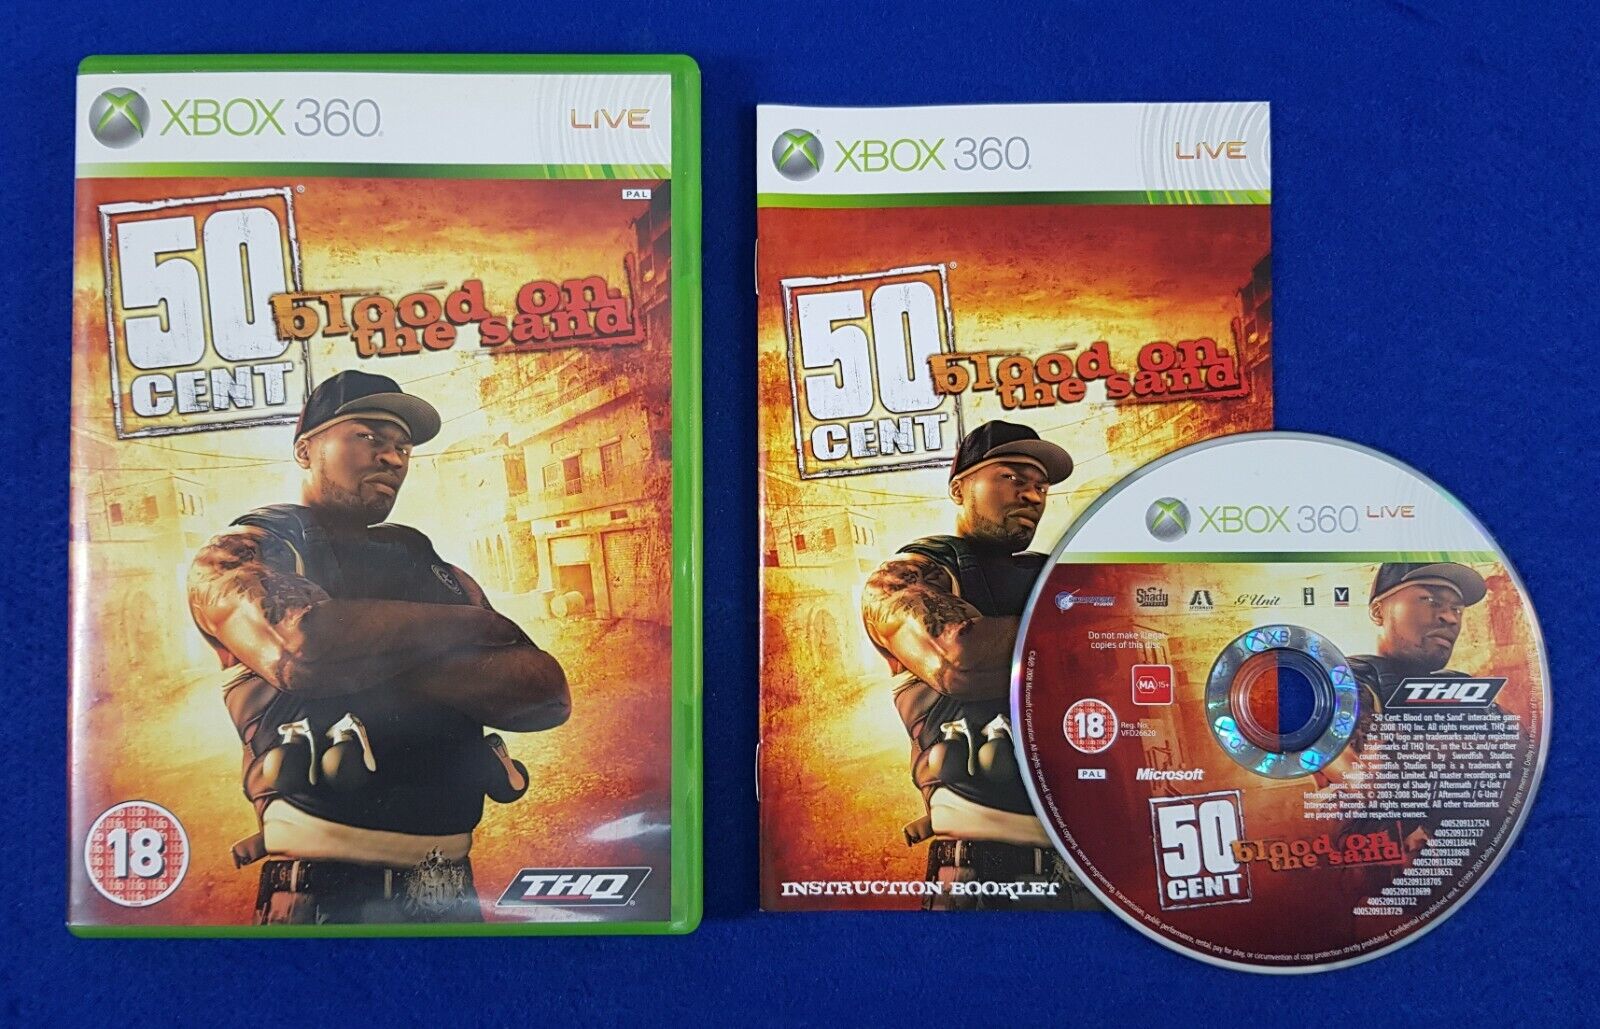 Likeur Concreet Ik heb een contract gemaakt xbox 360 50 CENT BLOOD ON THE SAND (Works On US Consoles) REGION FREE PAL  UK 752919550953 | eBay